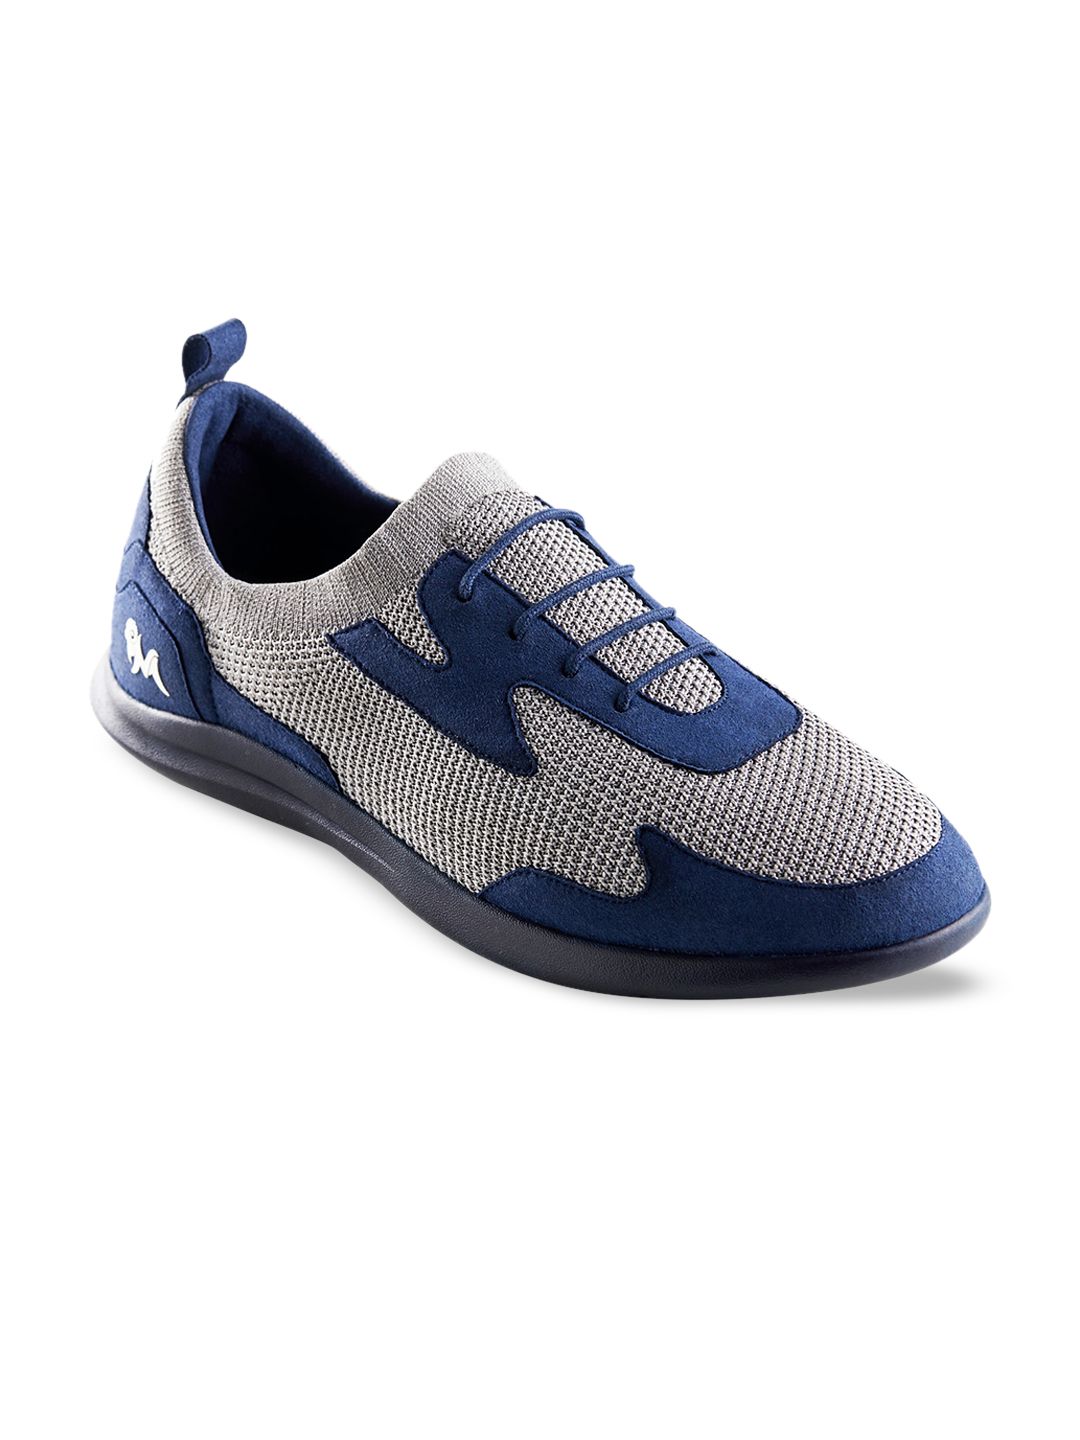 NEEMANS Unisex Blue Colourblocked Driving Shoes Price in India